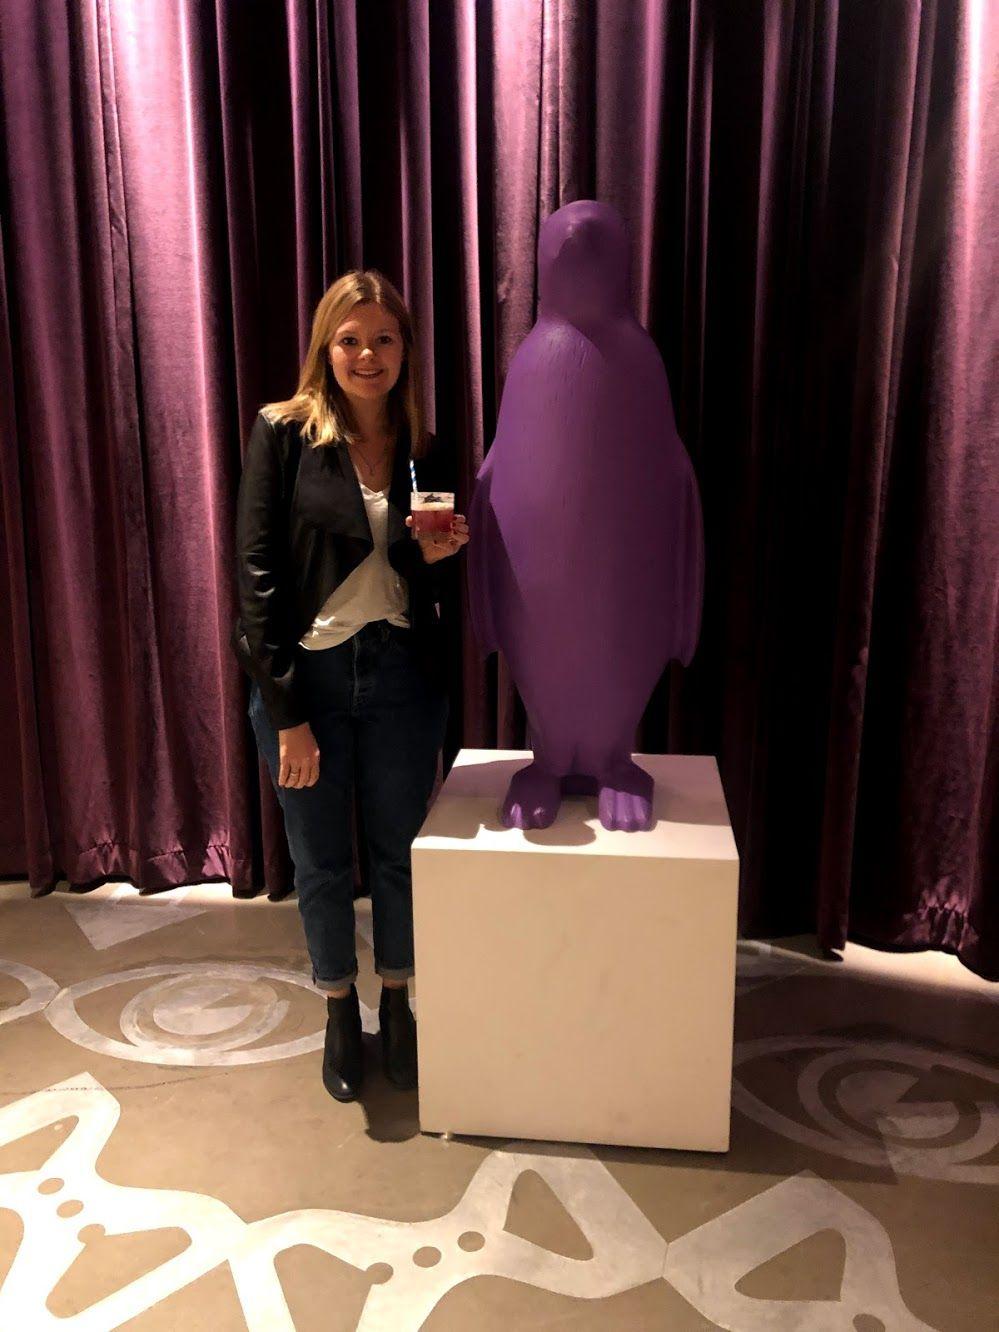 Lydia standing next to a purple penguin holding a cocktail.